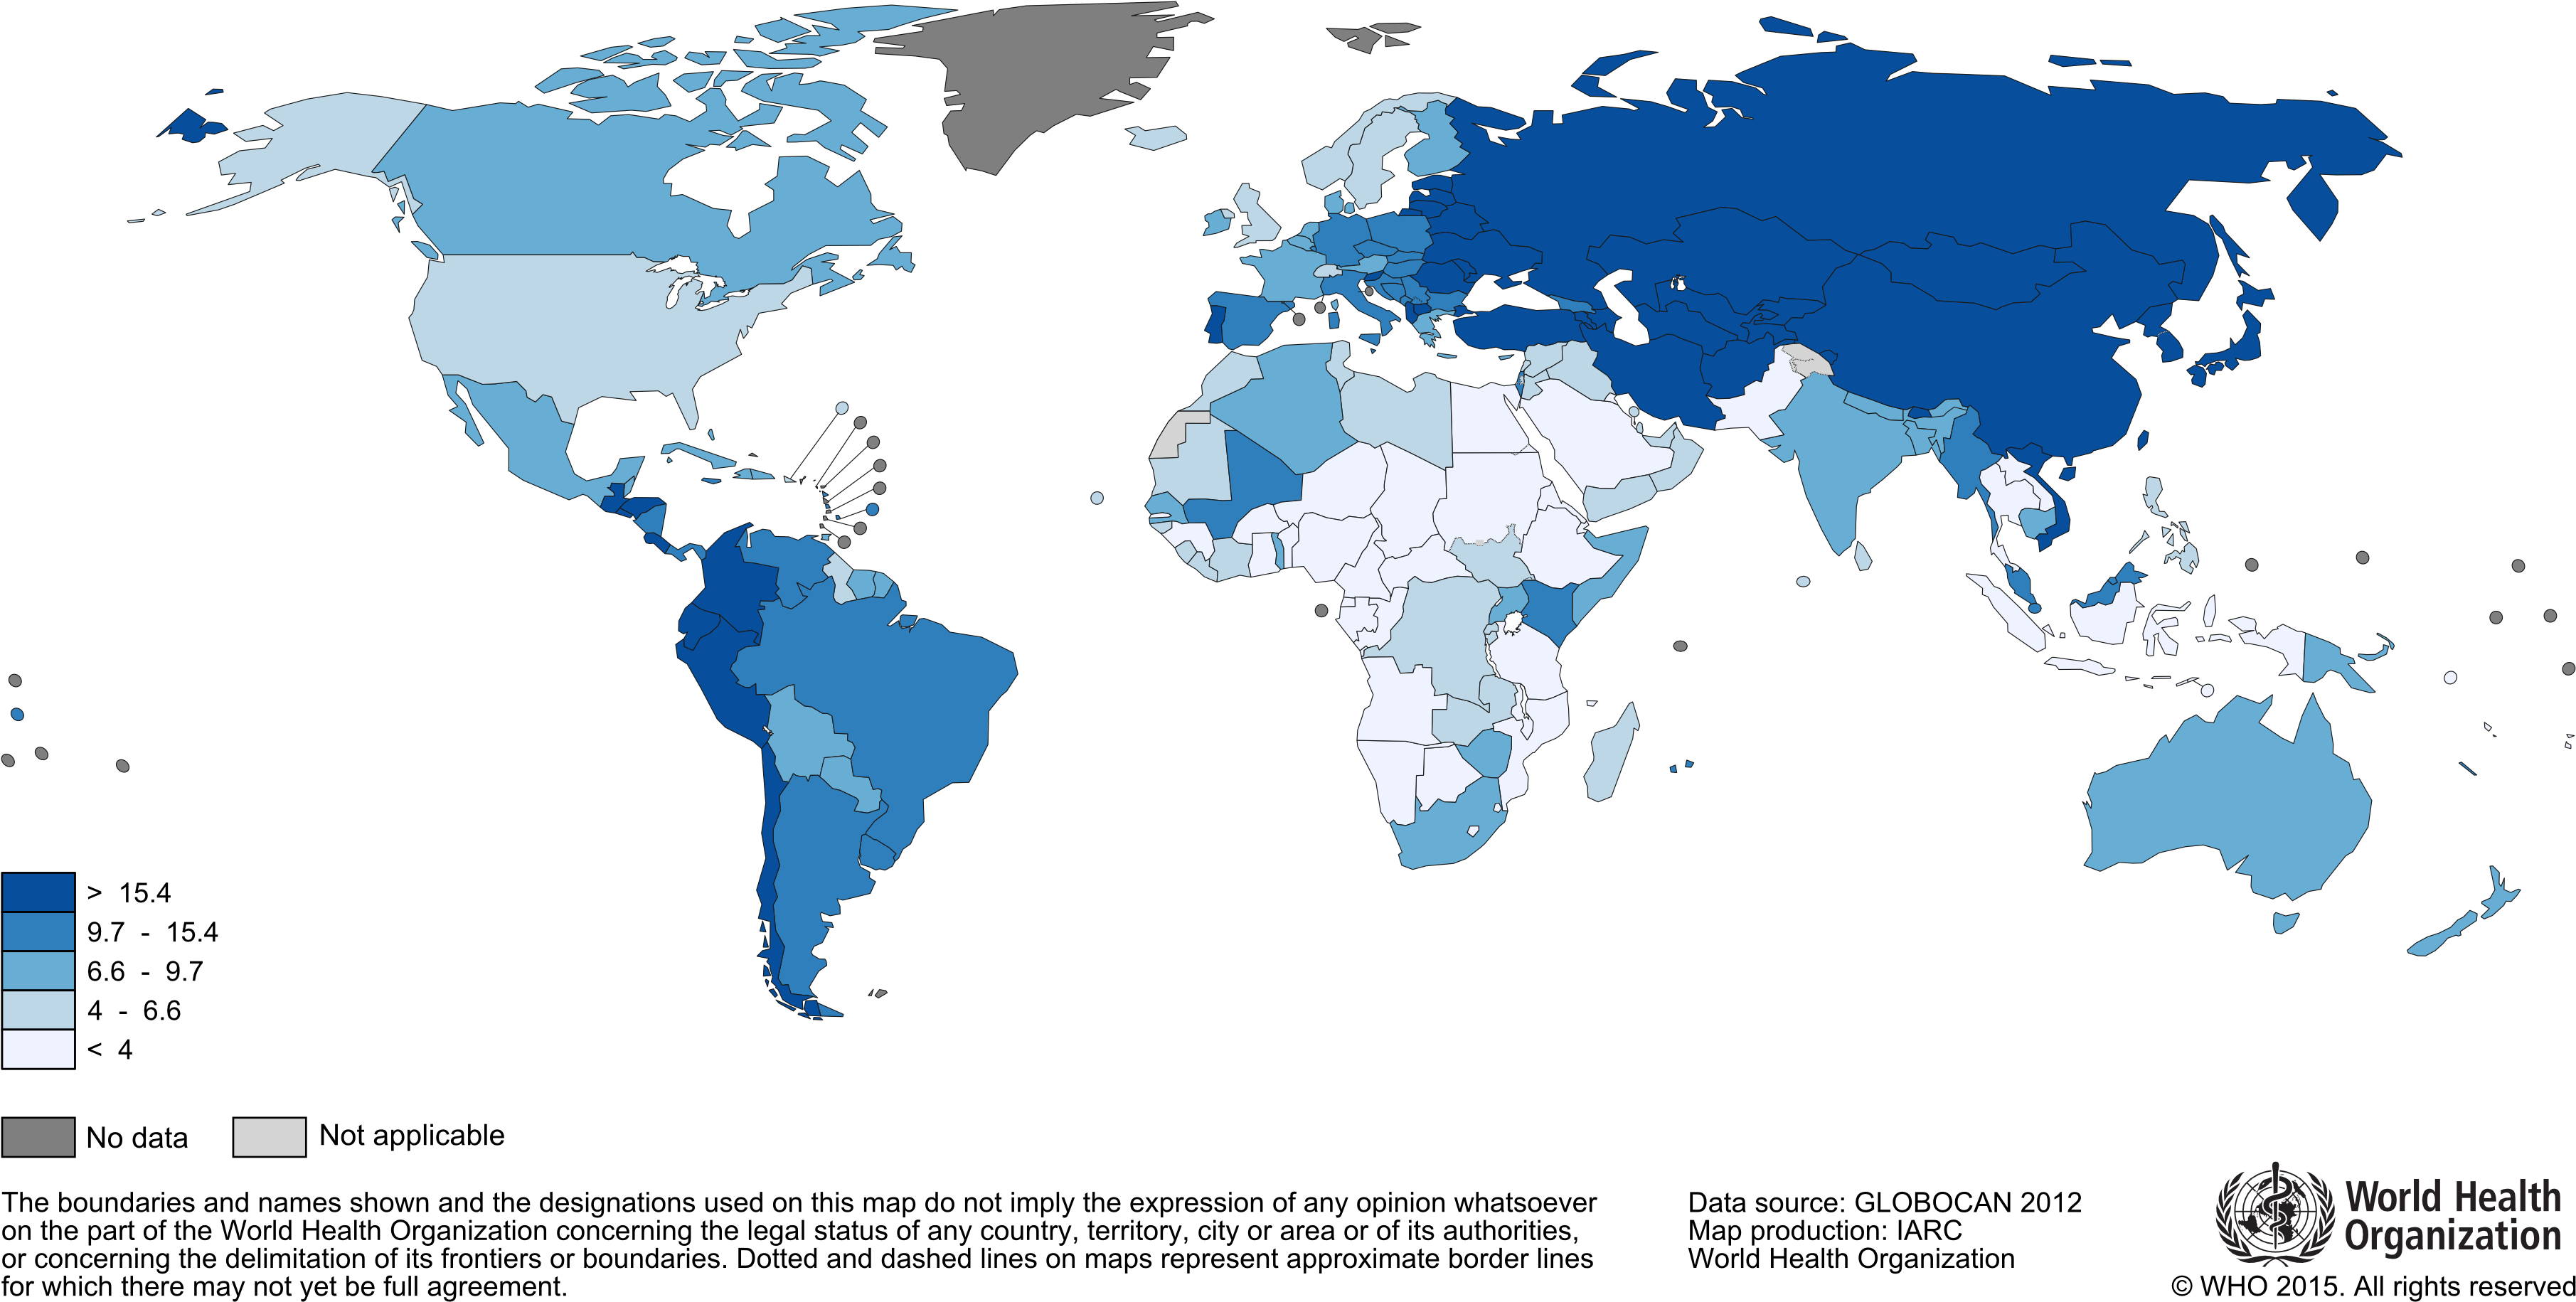 Estimated Age-standardised Rates Per 100,000 - Stomach Cancer In The World (3753x1962)